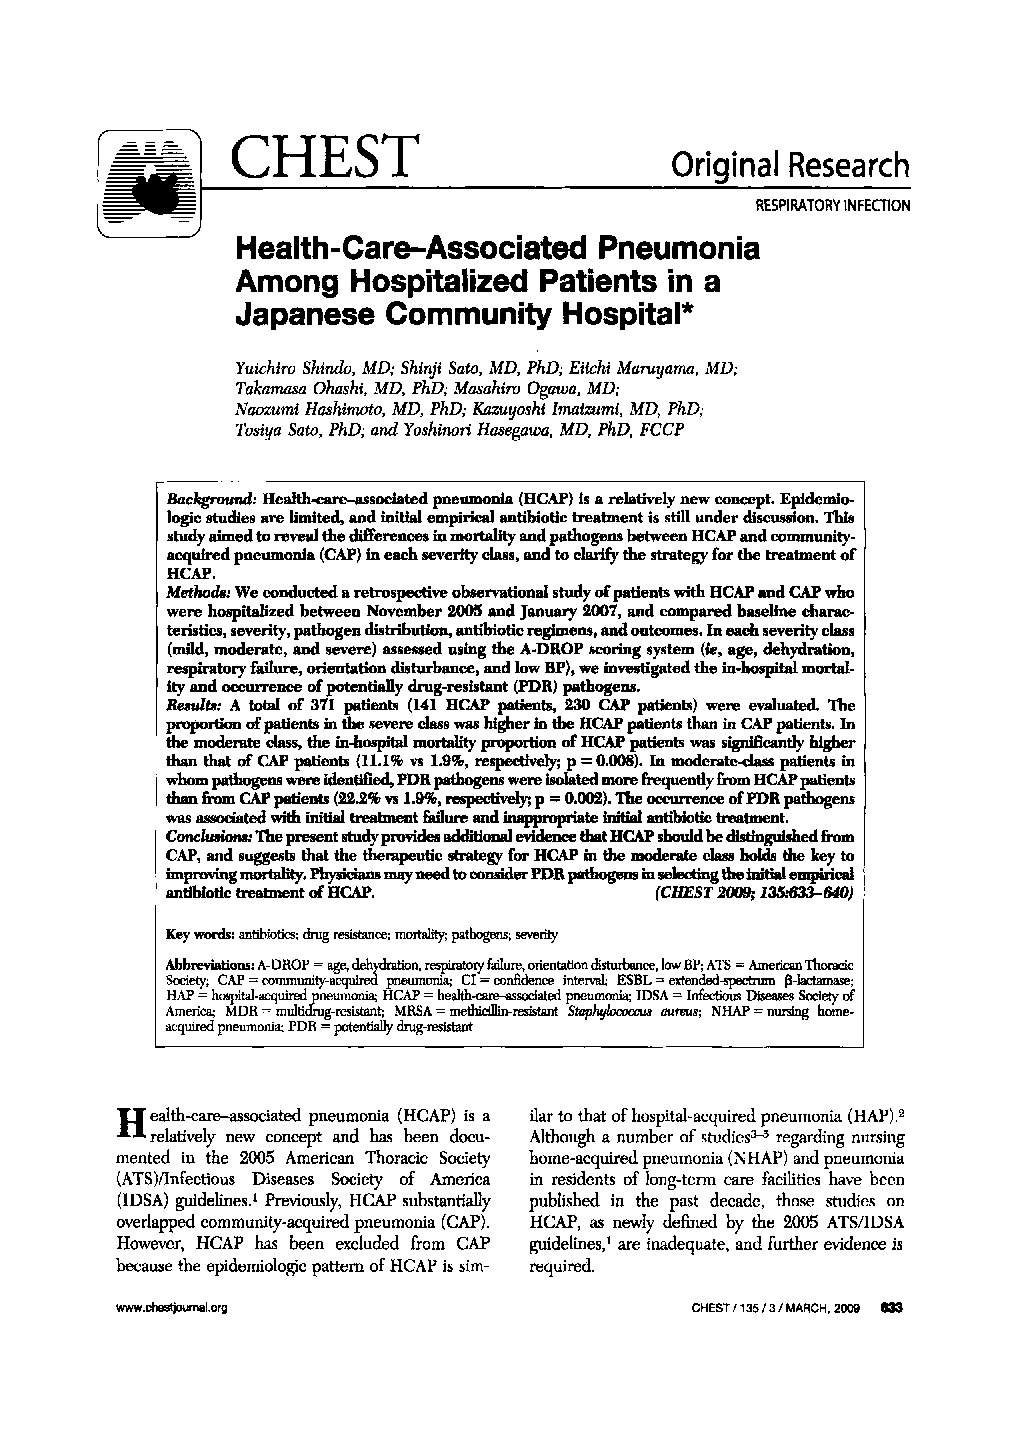 Health-Care-Associated Pneumonia Among Hospitalized Patients in a Japanese Community Hospital 